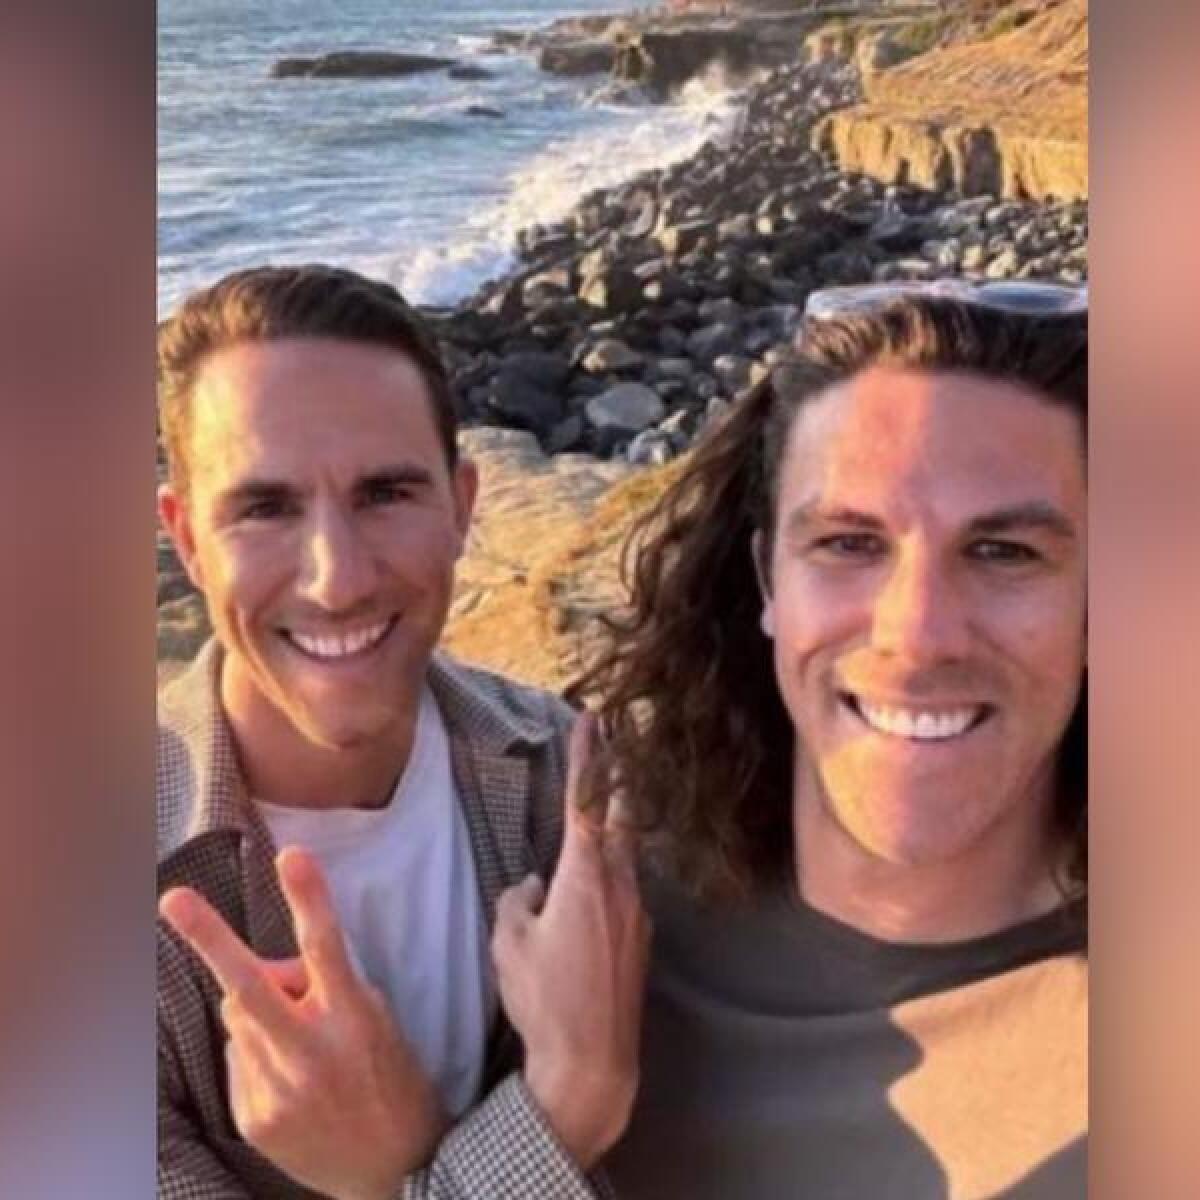 Perth brothers Callum and Jake Robinson went missing in Mexico.